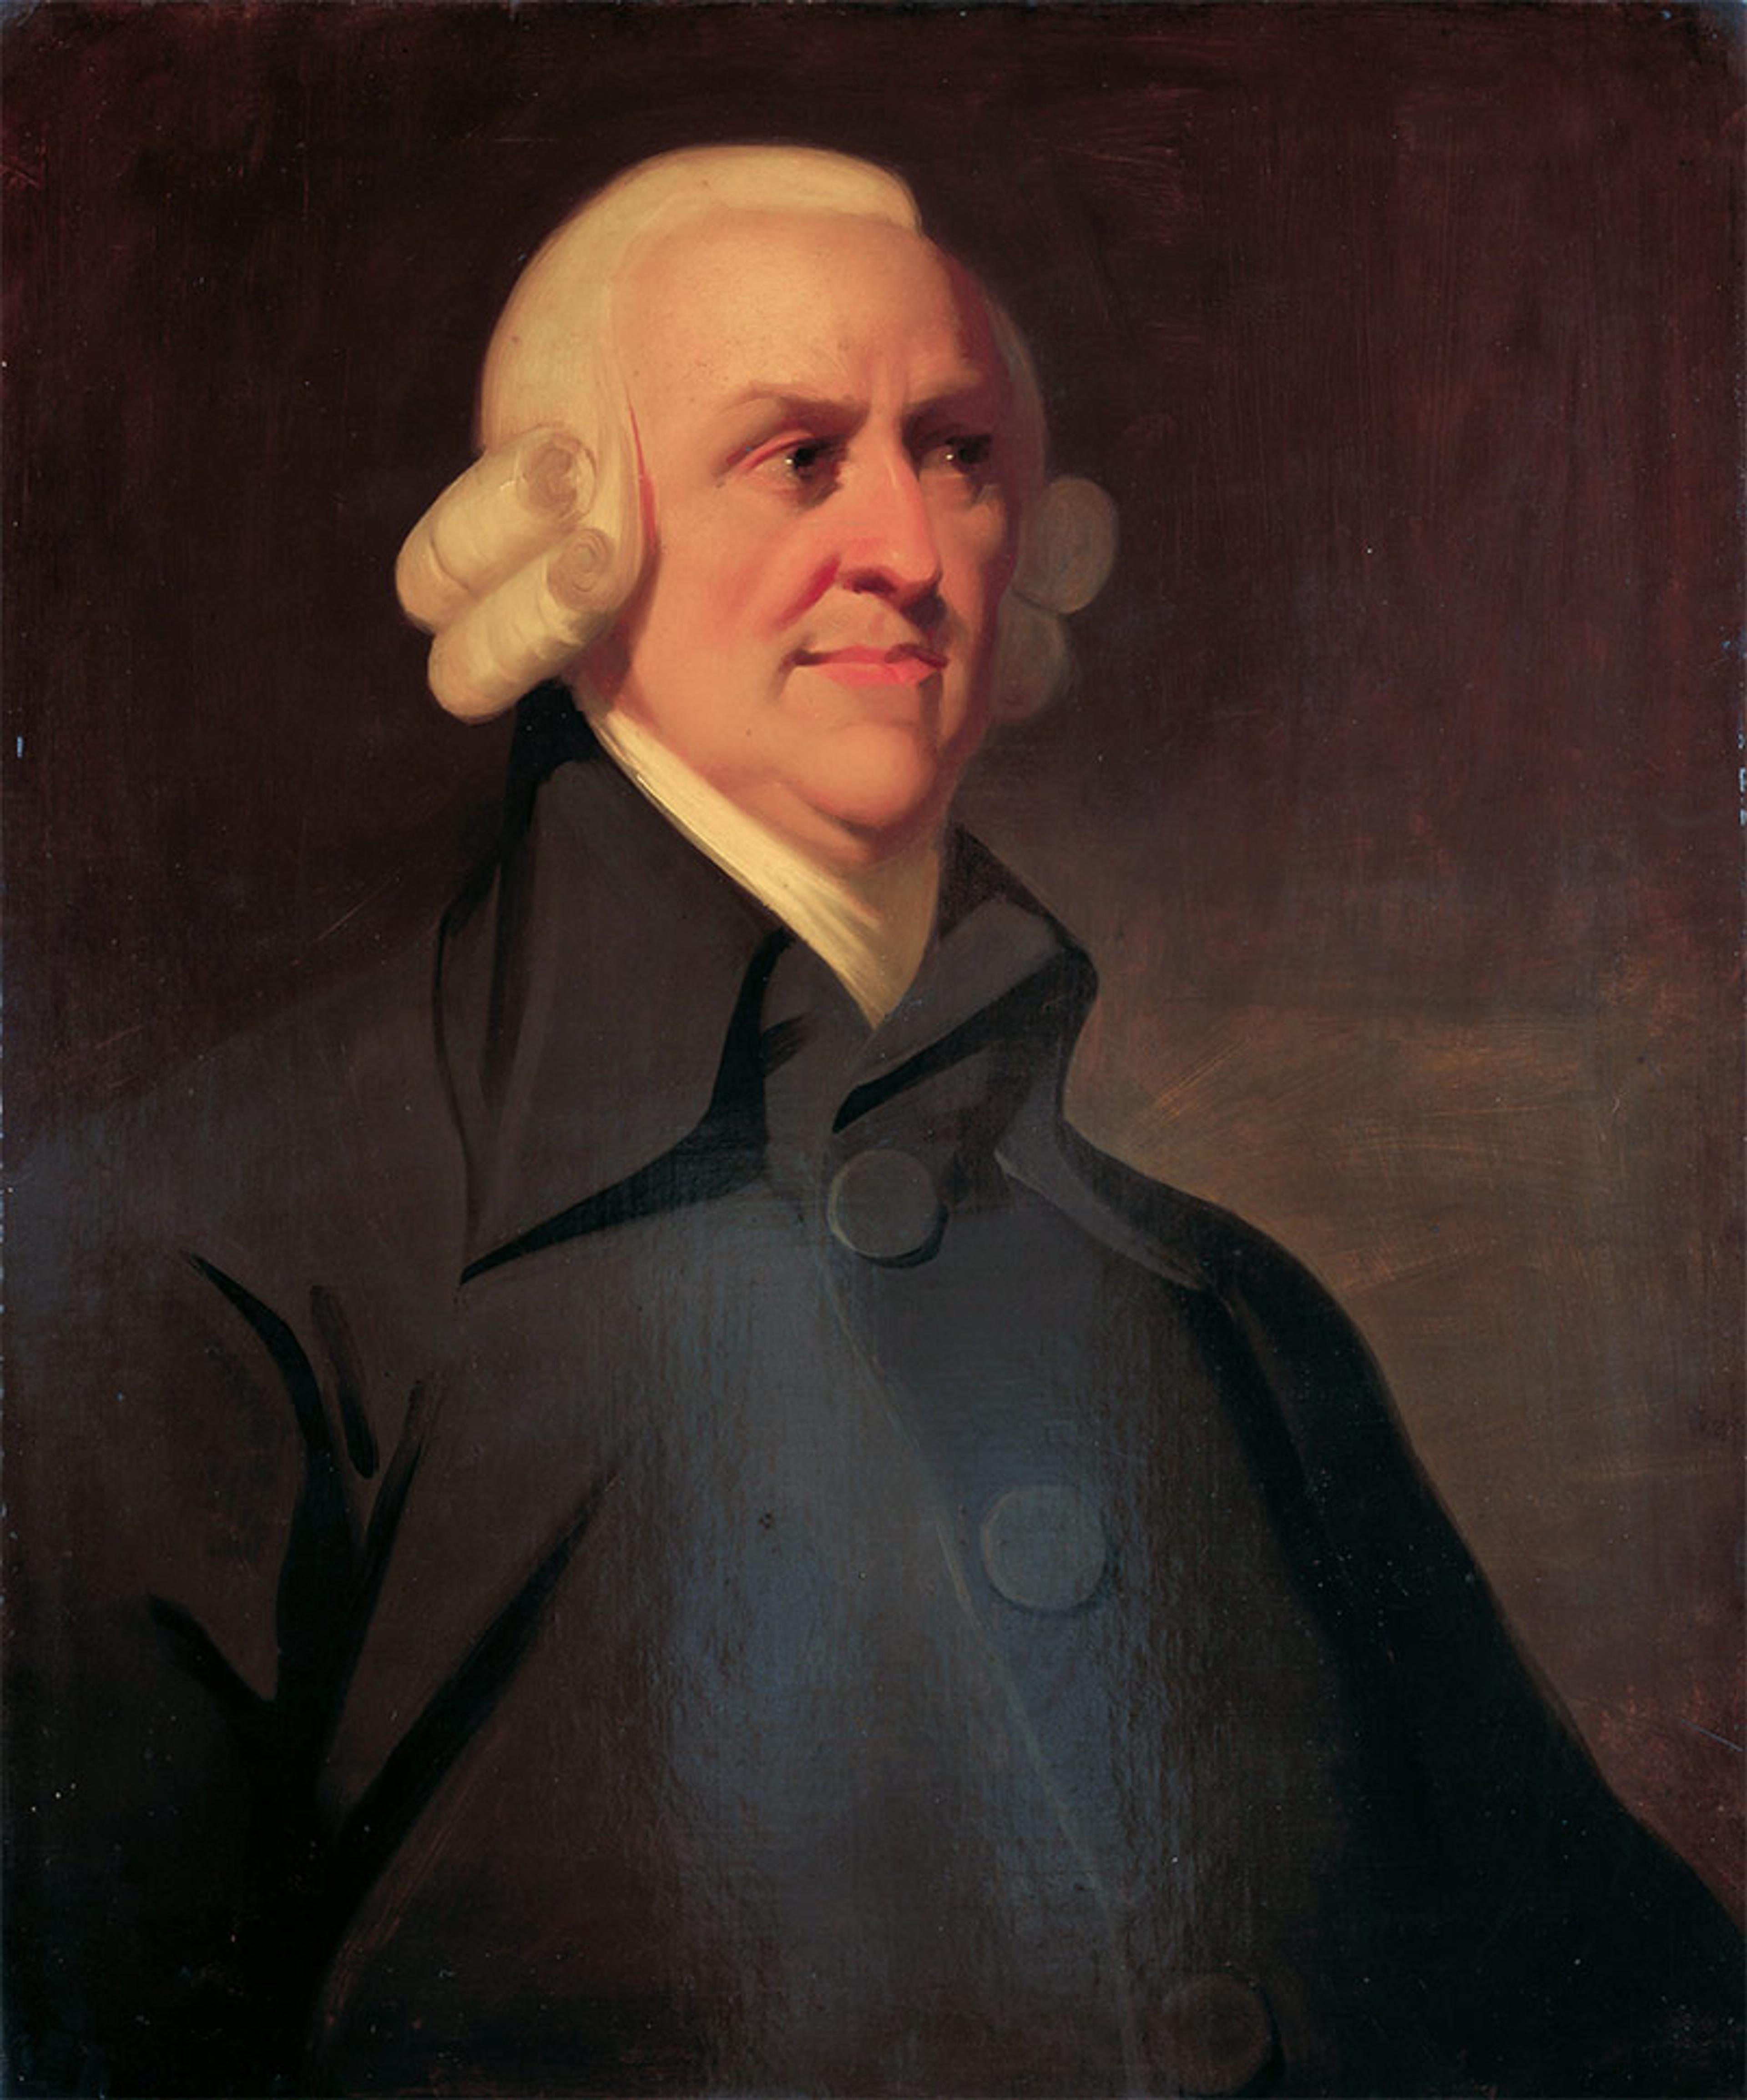 Portrait of a man with white hair in an 18th-century style wig, wearing a dark coat with a high collar and large buttons, depicted against a muted brown background. The man is looking slightly to the right with a serious expression.